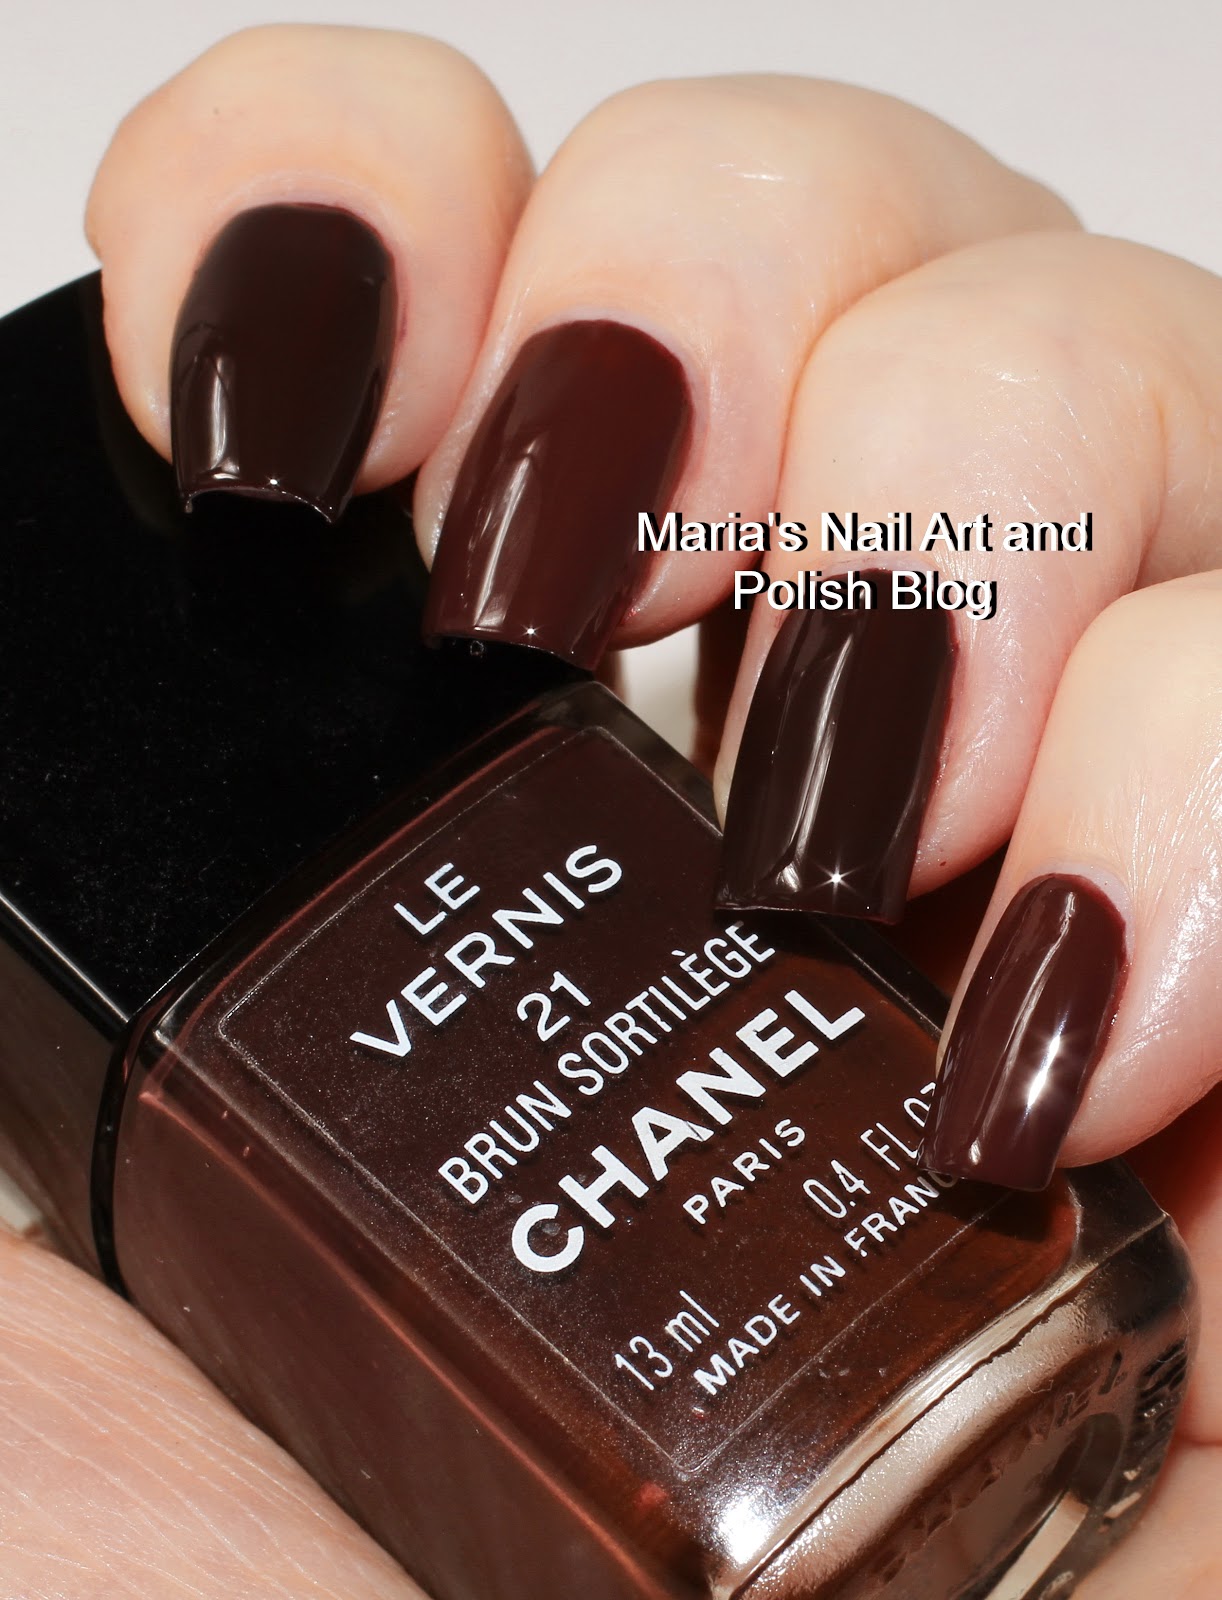 Marias Nail Art and Polish Blog: Chanel Brun Sortilege - Sorceress 21 in and in versions